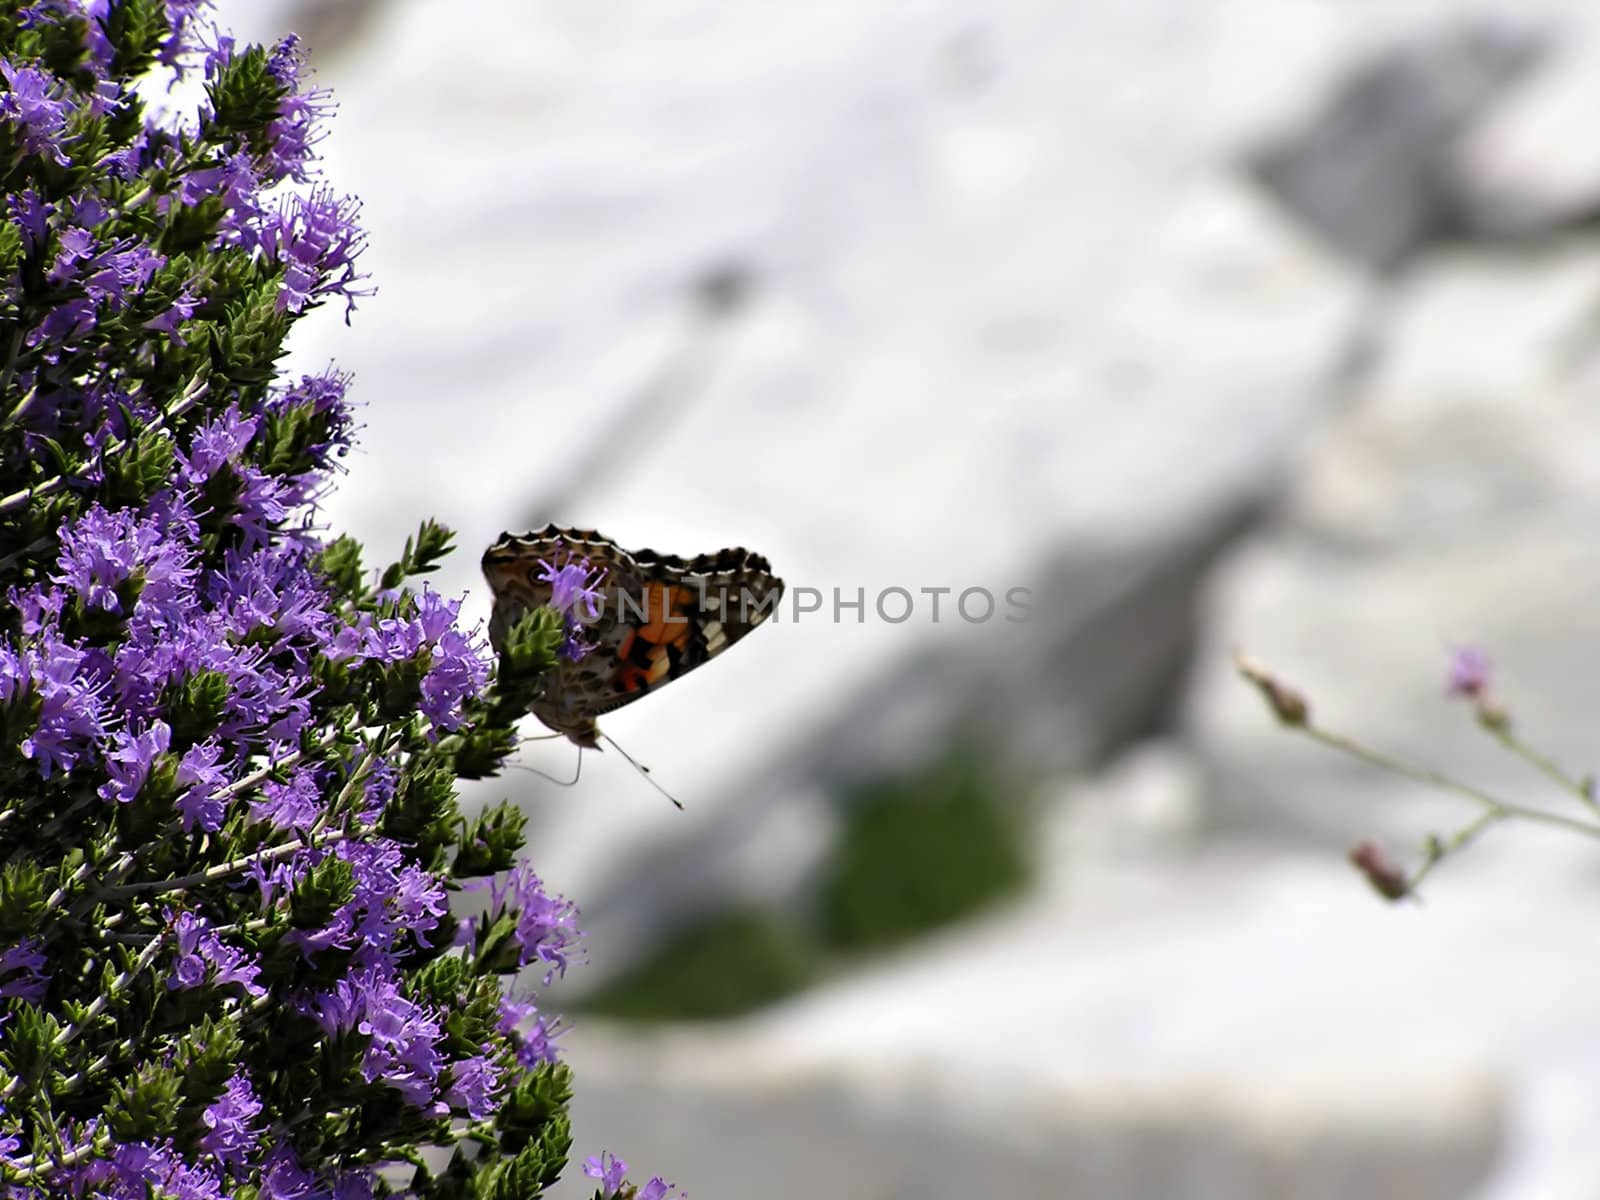 Butterfly and flowers by penta